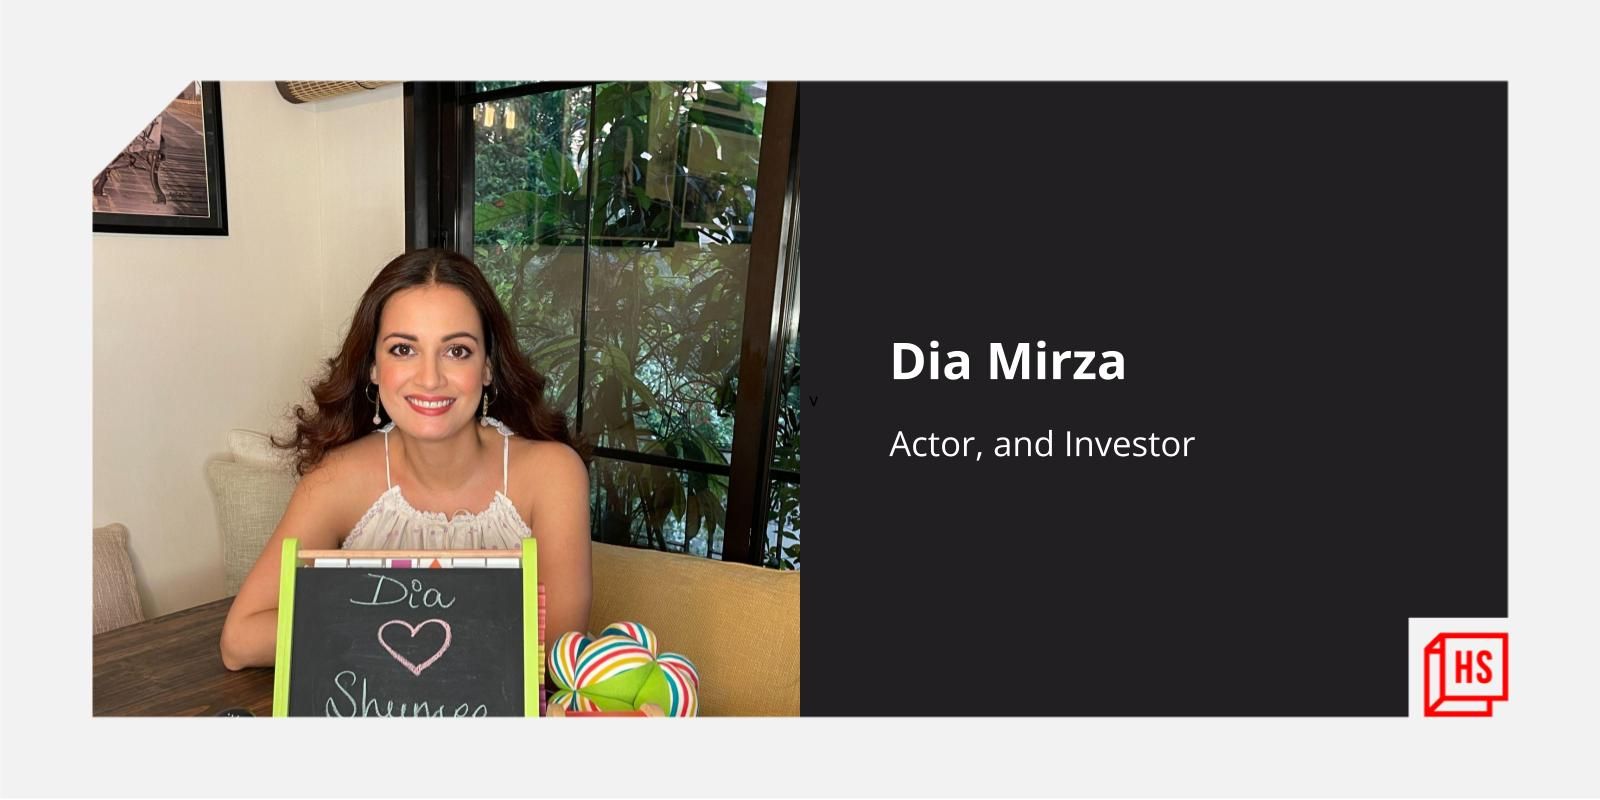 Why Dia Mirza decided to invest in a toy startup started by an IIT-Delhi alum